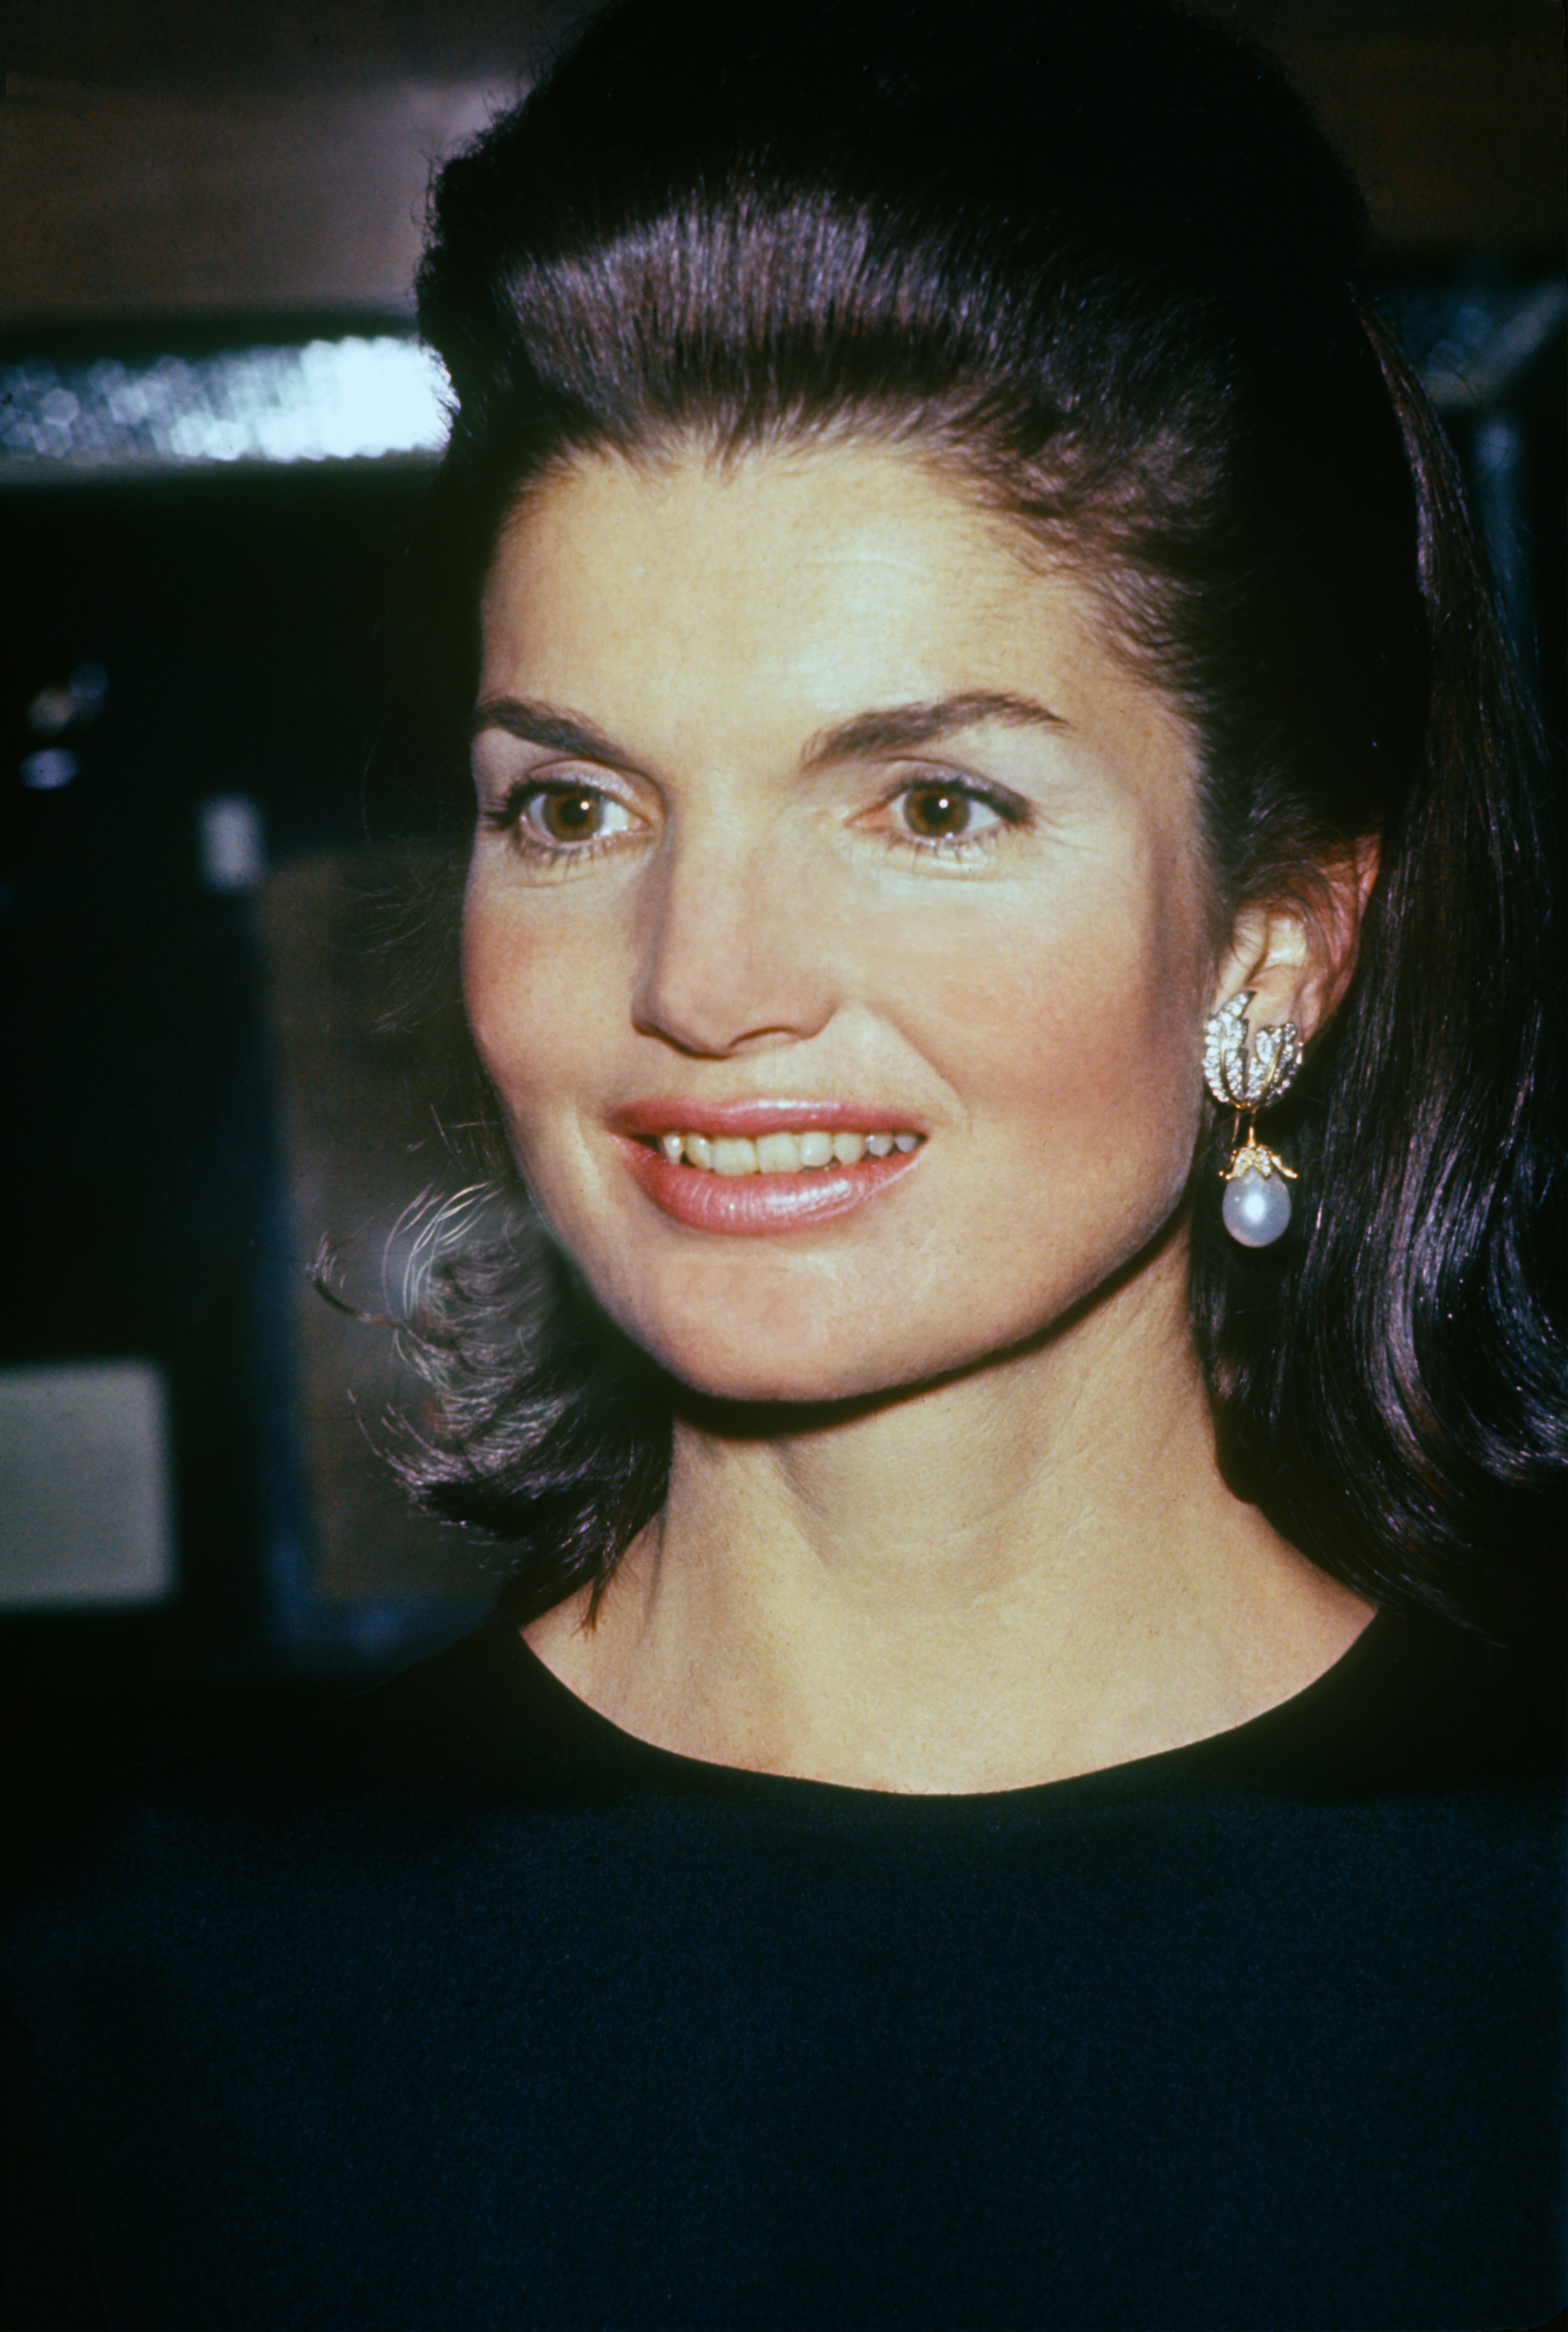 Jackie Kennedy's portrait, taken on October 10, 1968 in New York, New York. | Source: Getty Images